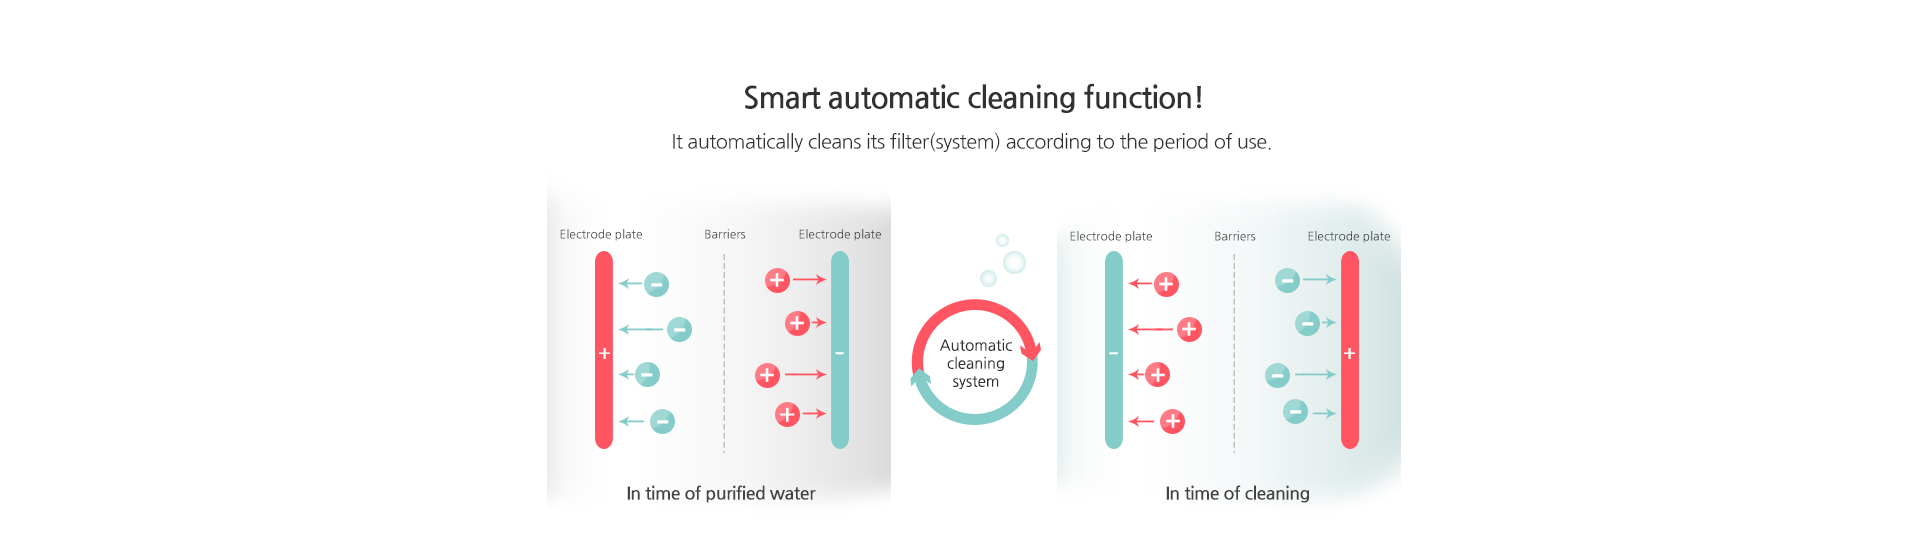 Smart automatic cleaning function!It automatically cleans its filter(system) according to the period of use.